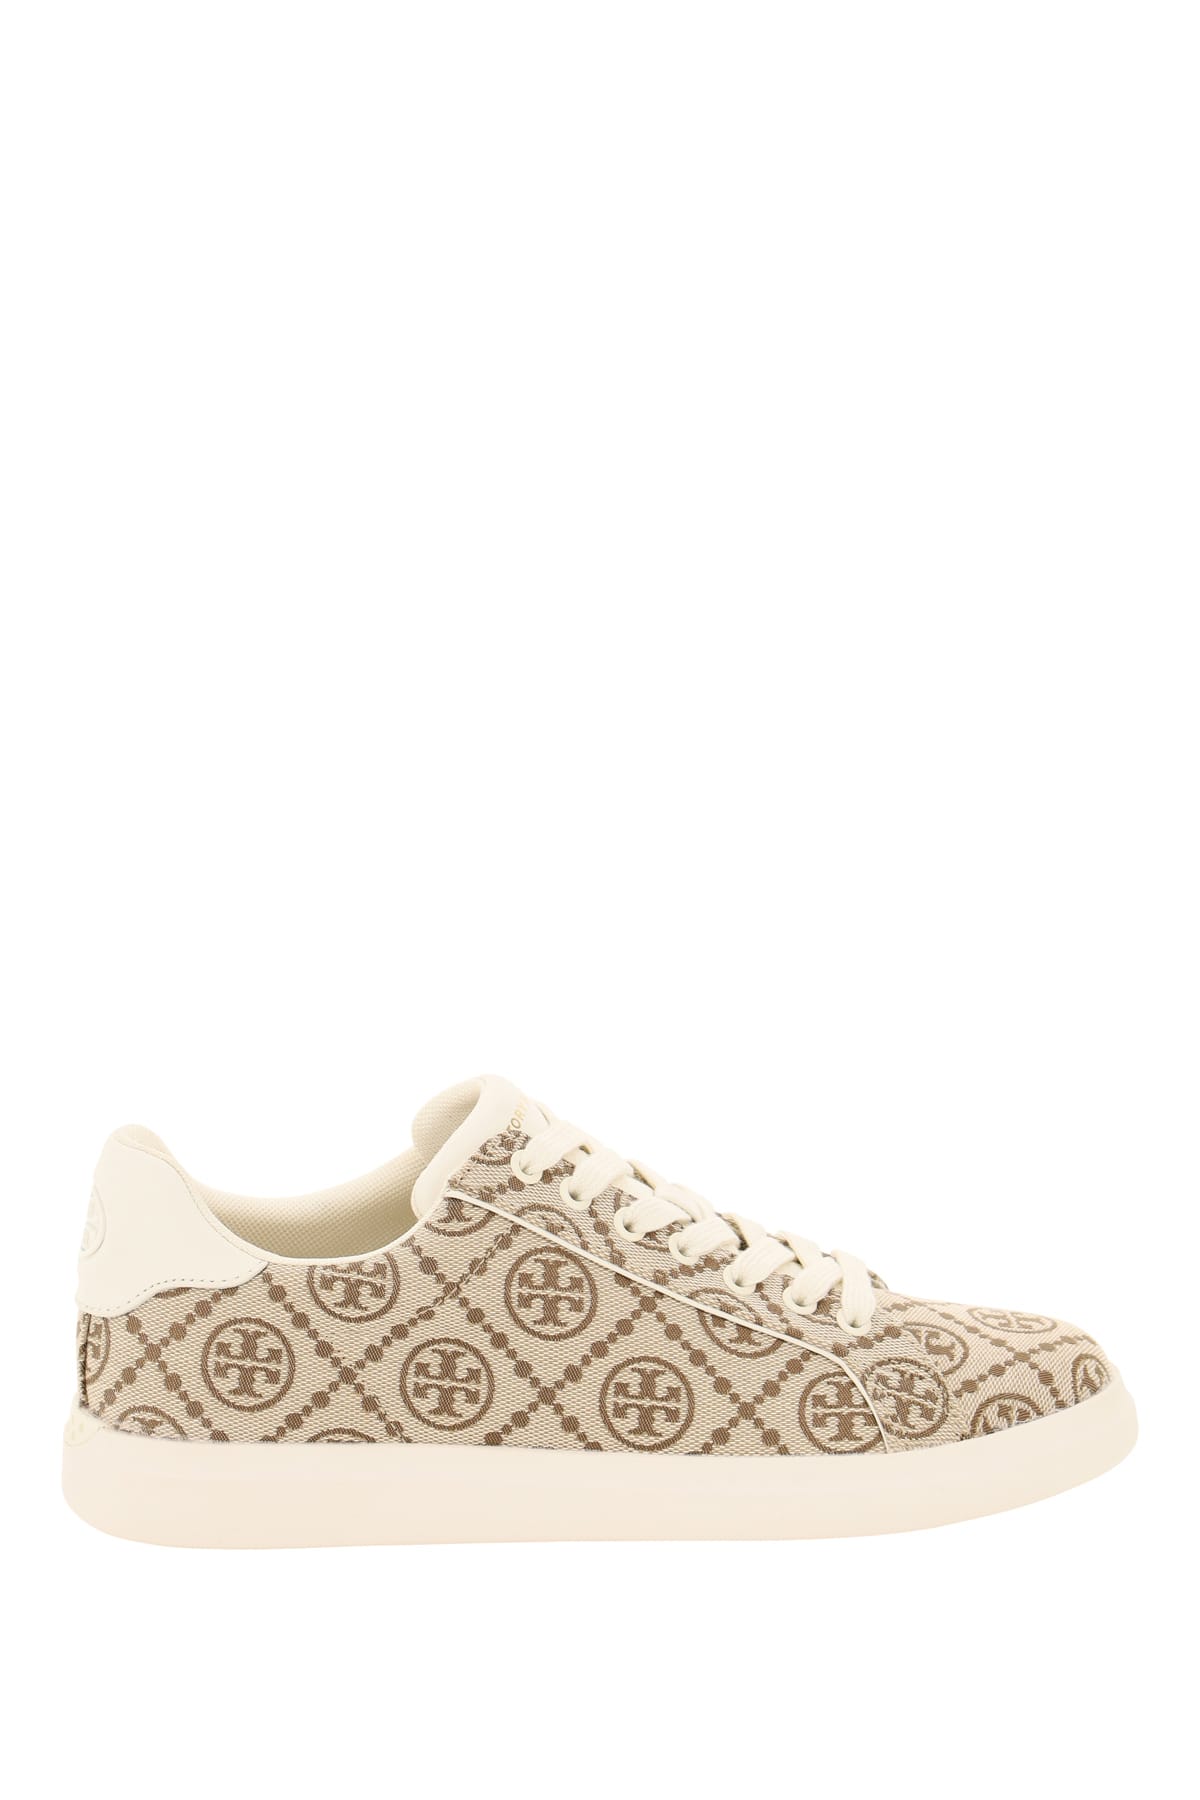 Tory Burch T-monogram Howell Court Sneakers